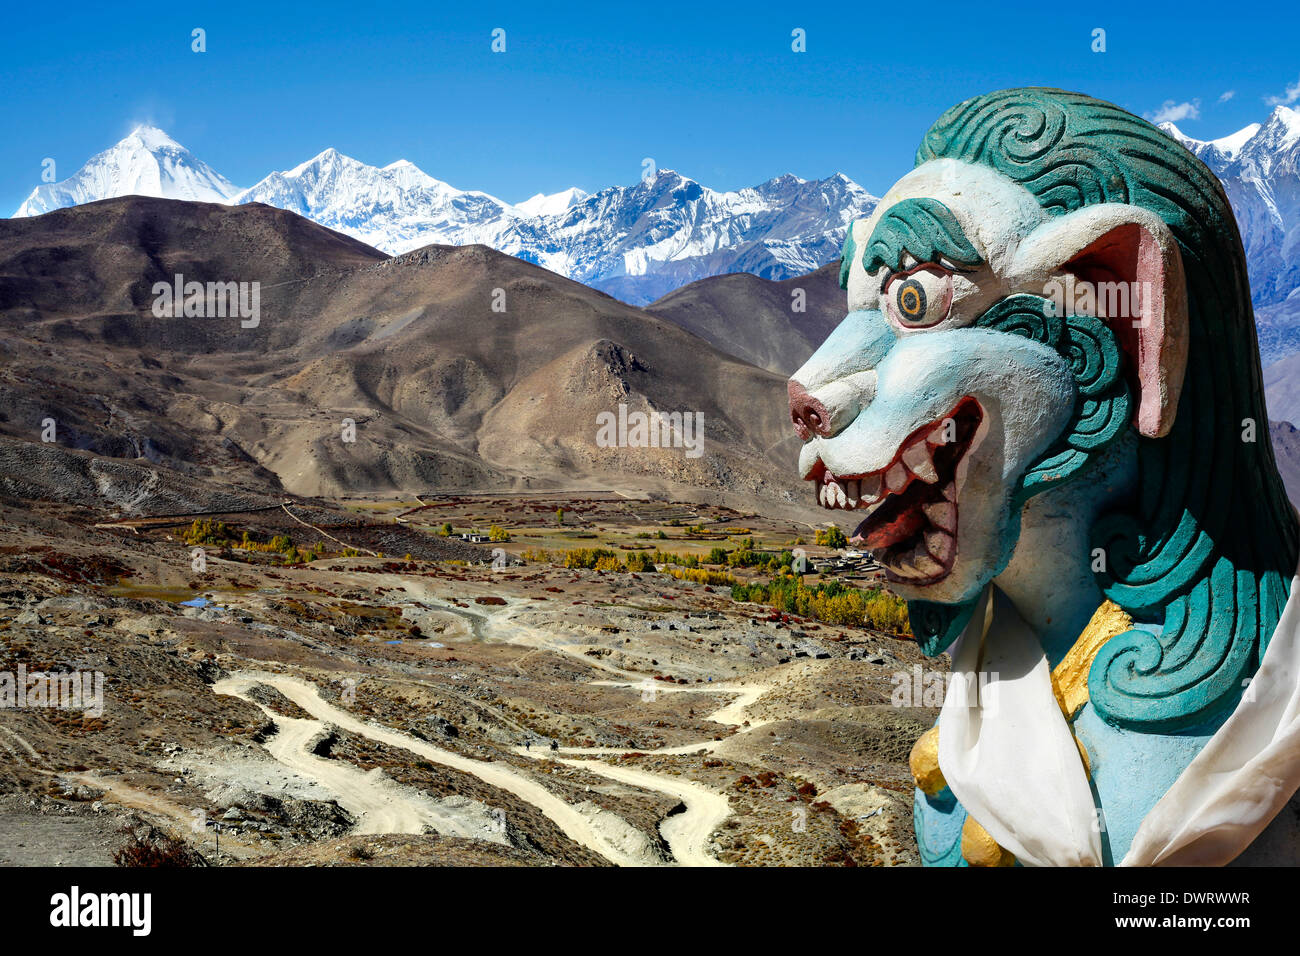 Ancient lion sculpture in Himalaya mountains in Nepal. Stock Photo